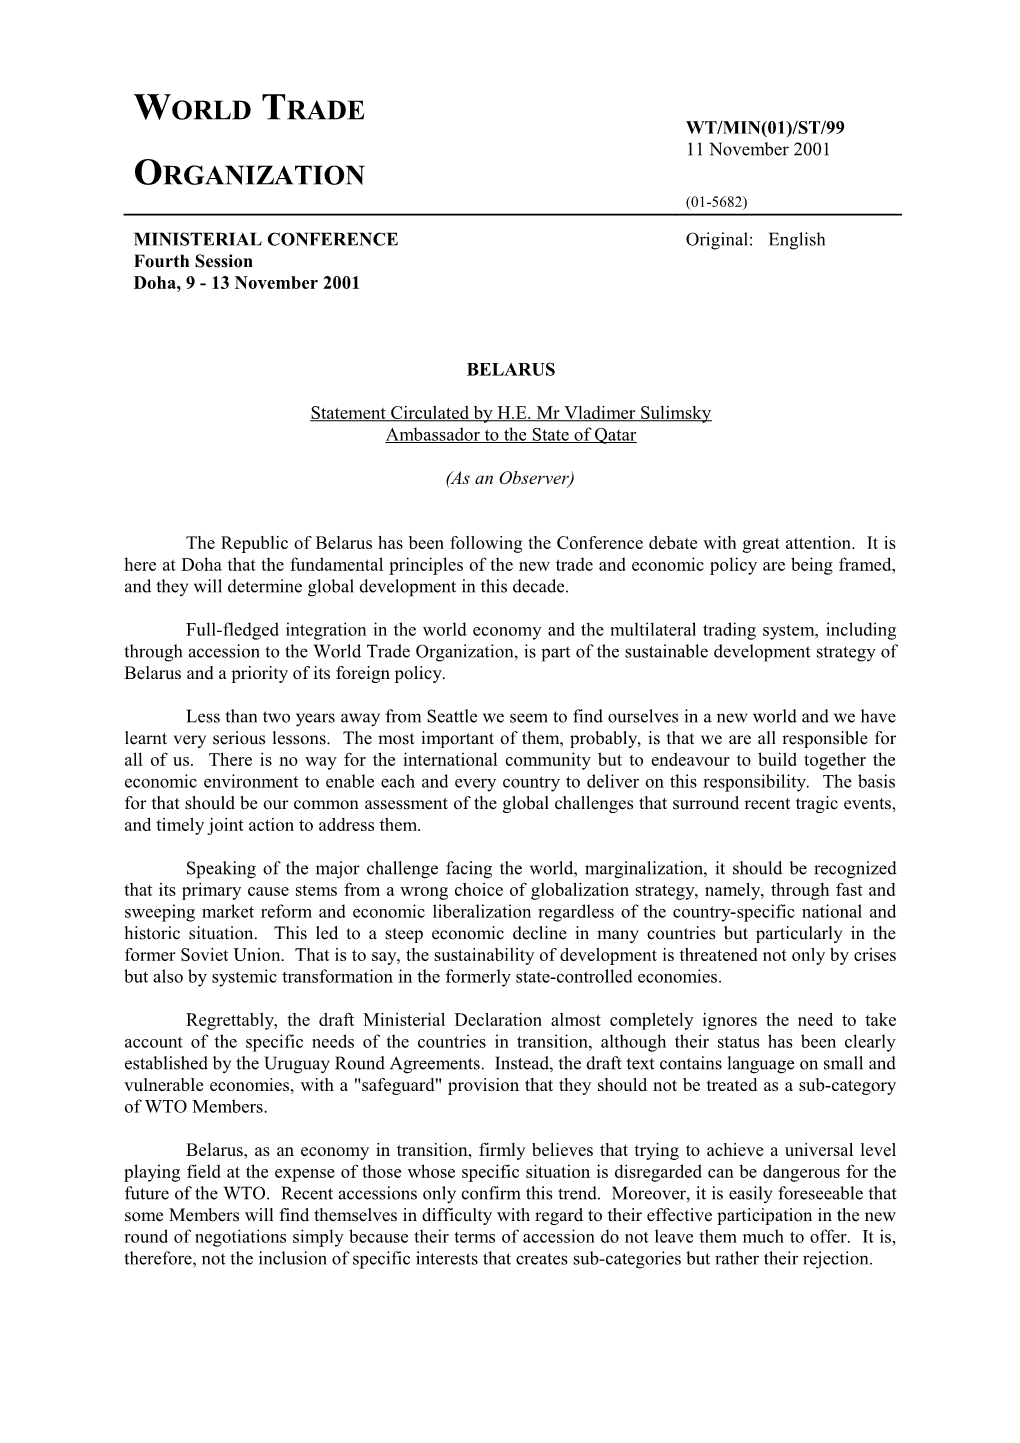 Statement Circulated by H.E. Mr Vladimer Sulimsky